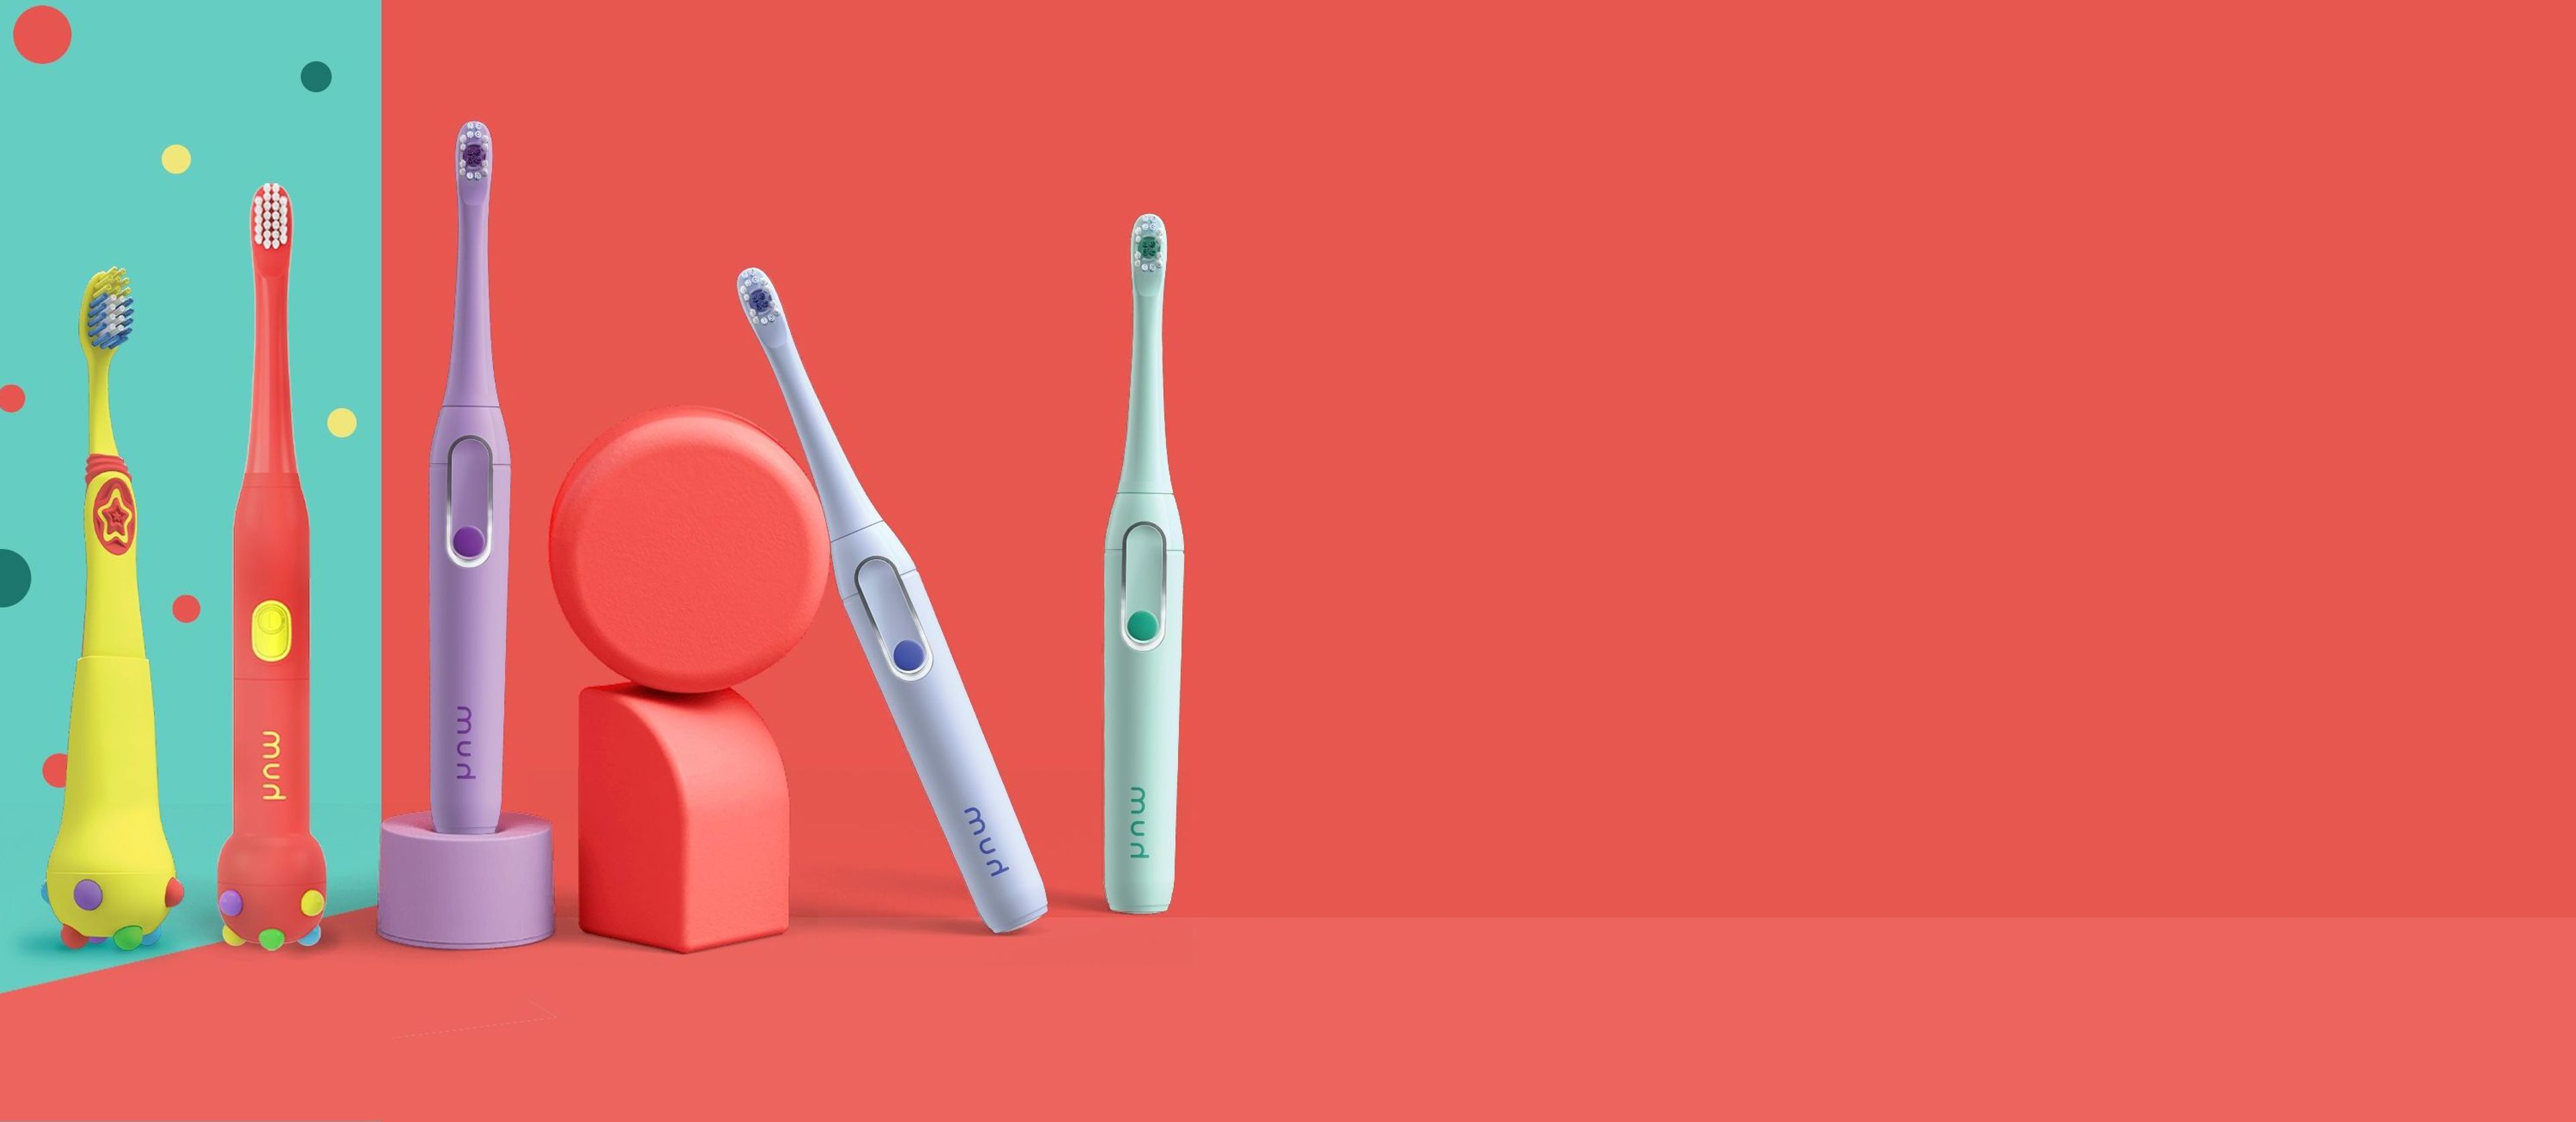 Hum toothbrushes in different colors 